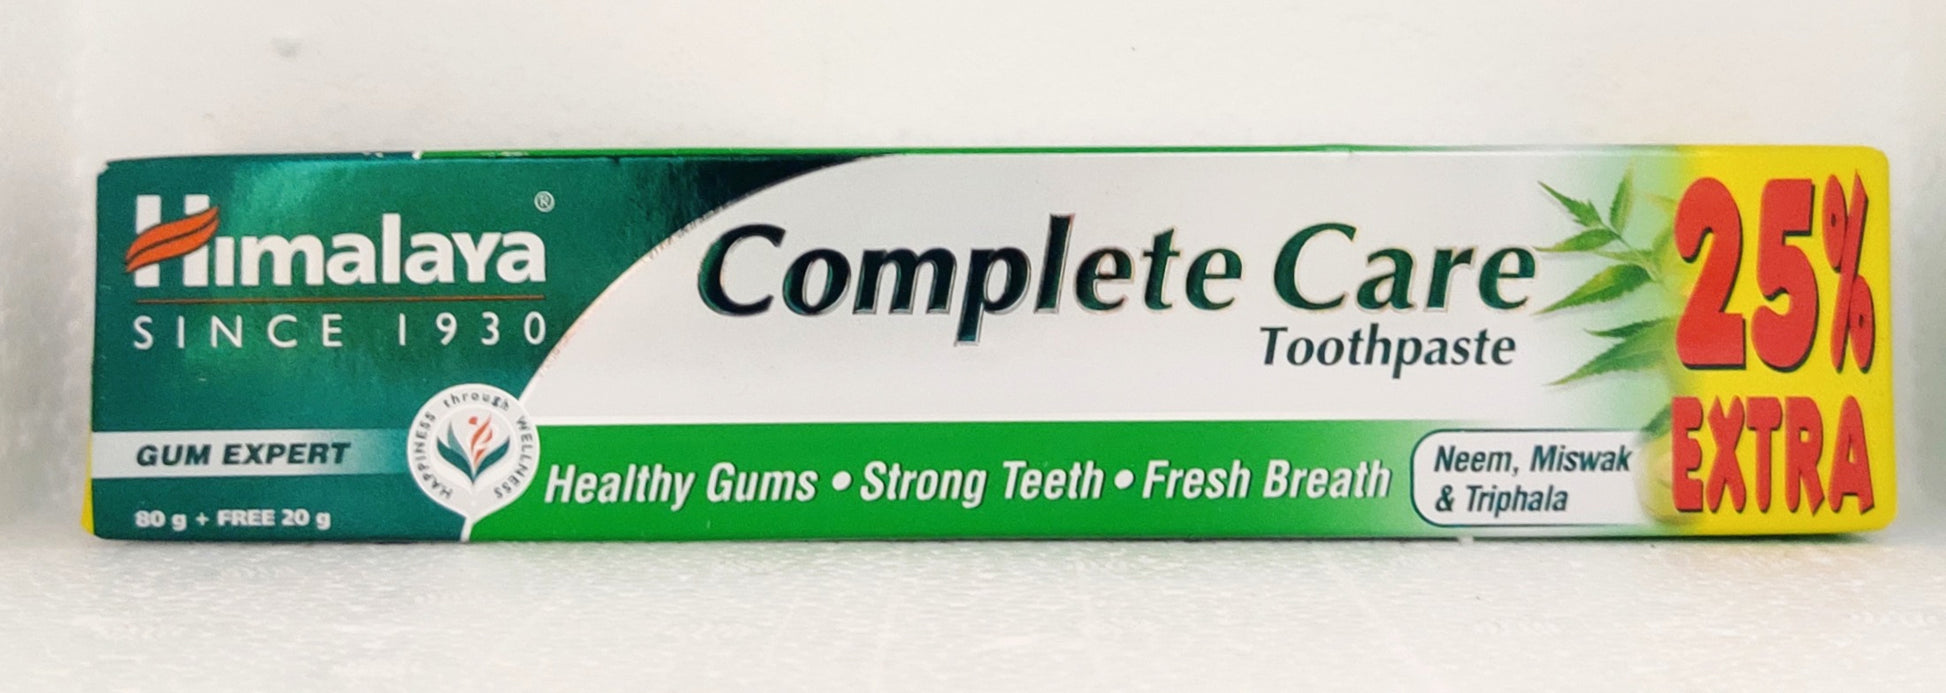 Shop Himalaya complete care toothpaste 80gm at price 50.00 from Himalaya Online - Ayush Care